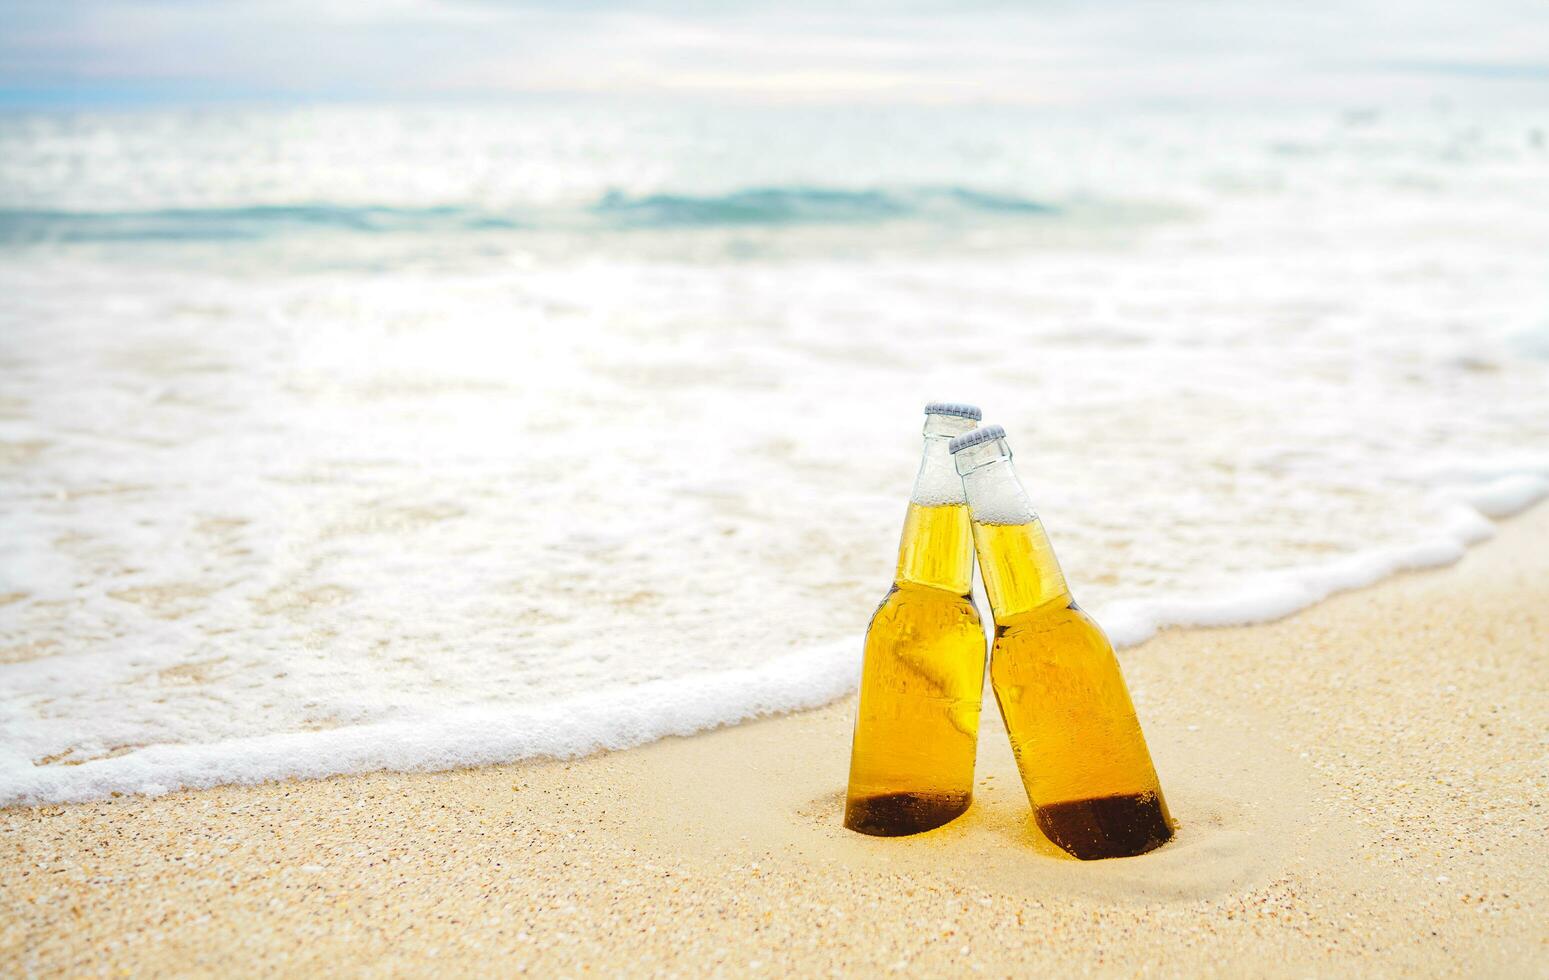 Bottles of Beer on the sandy beach with sea ocean background. Party, Friendship, Beer Concept. photo